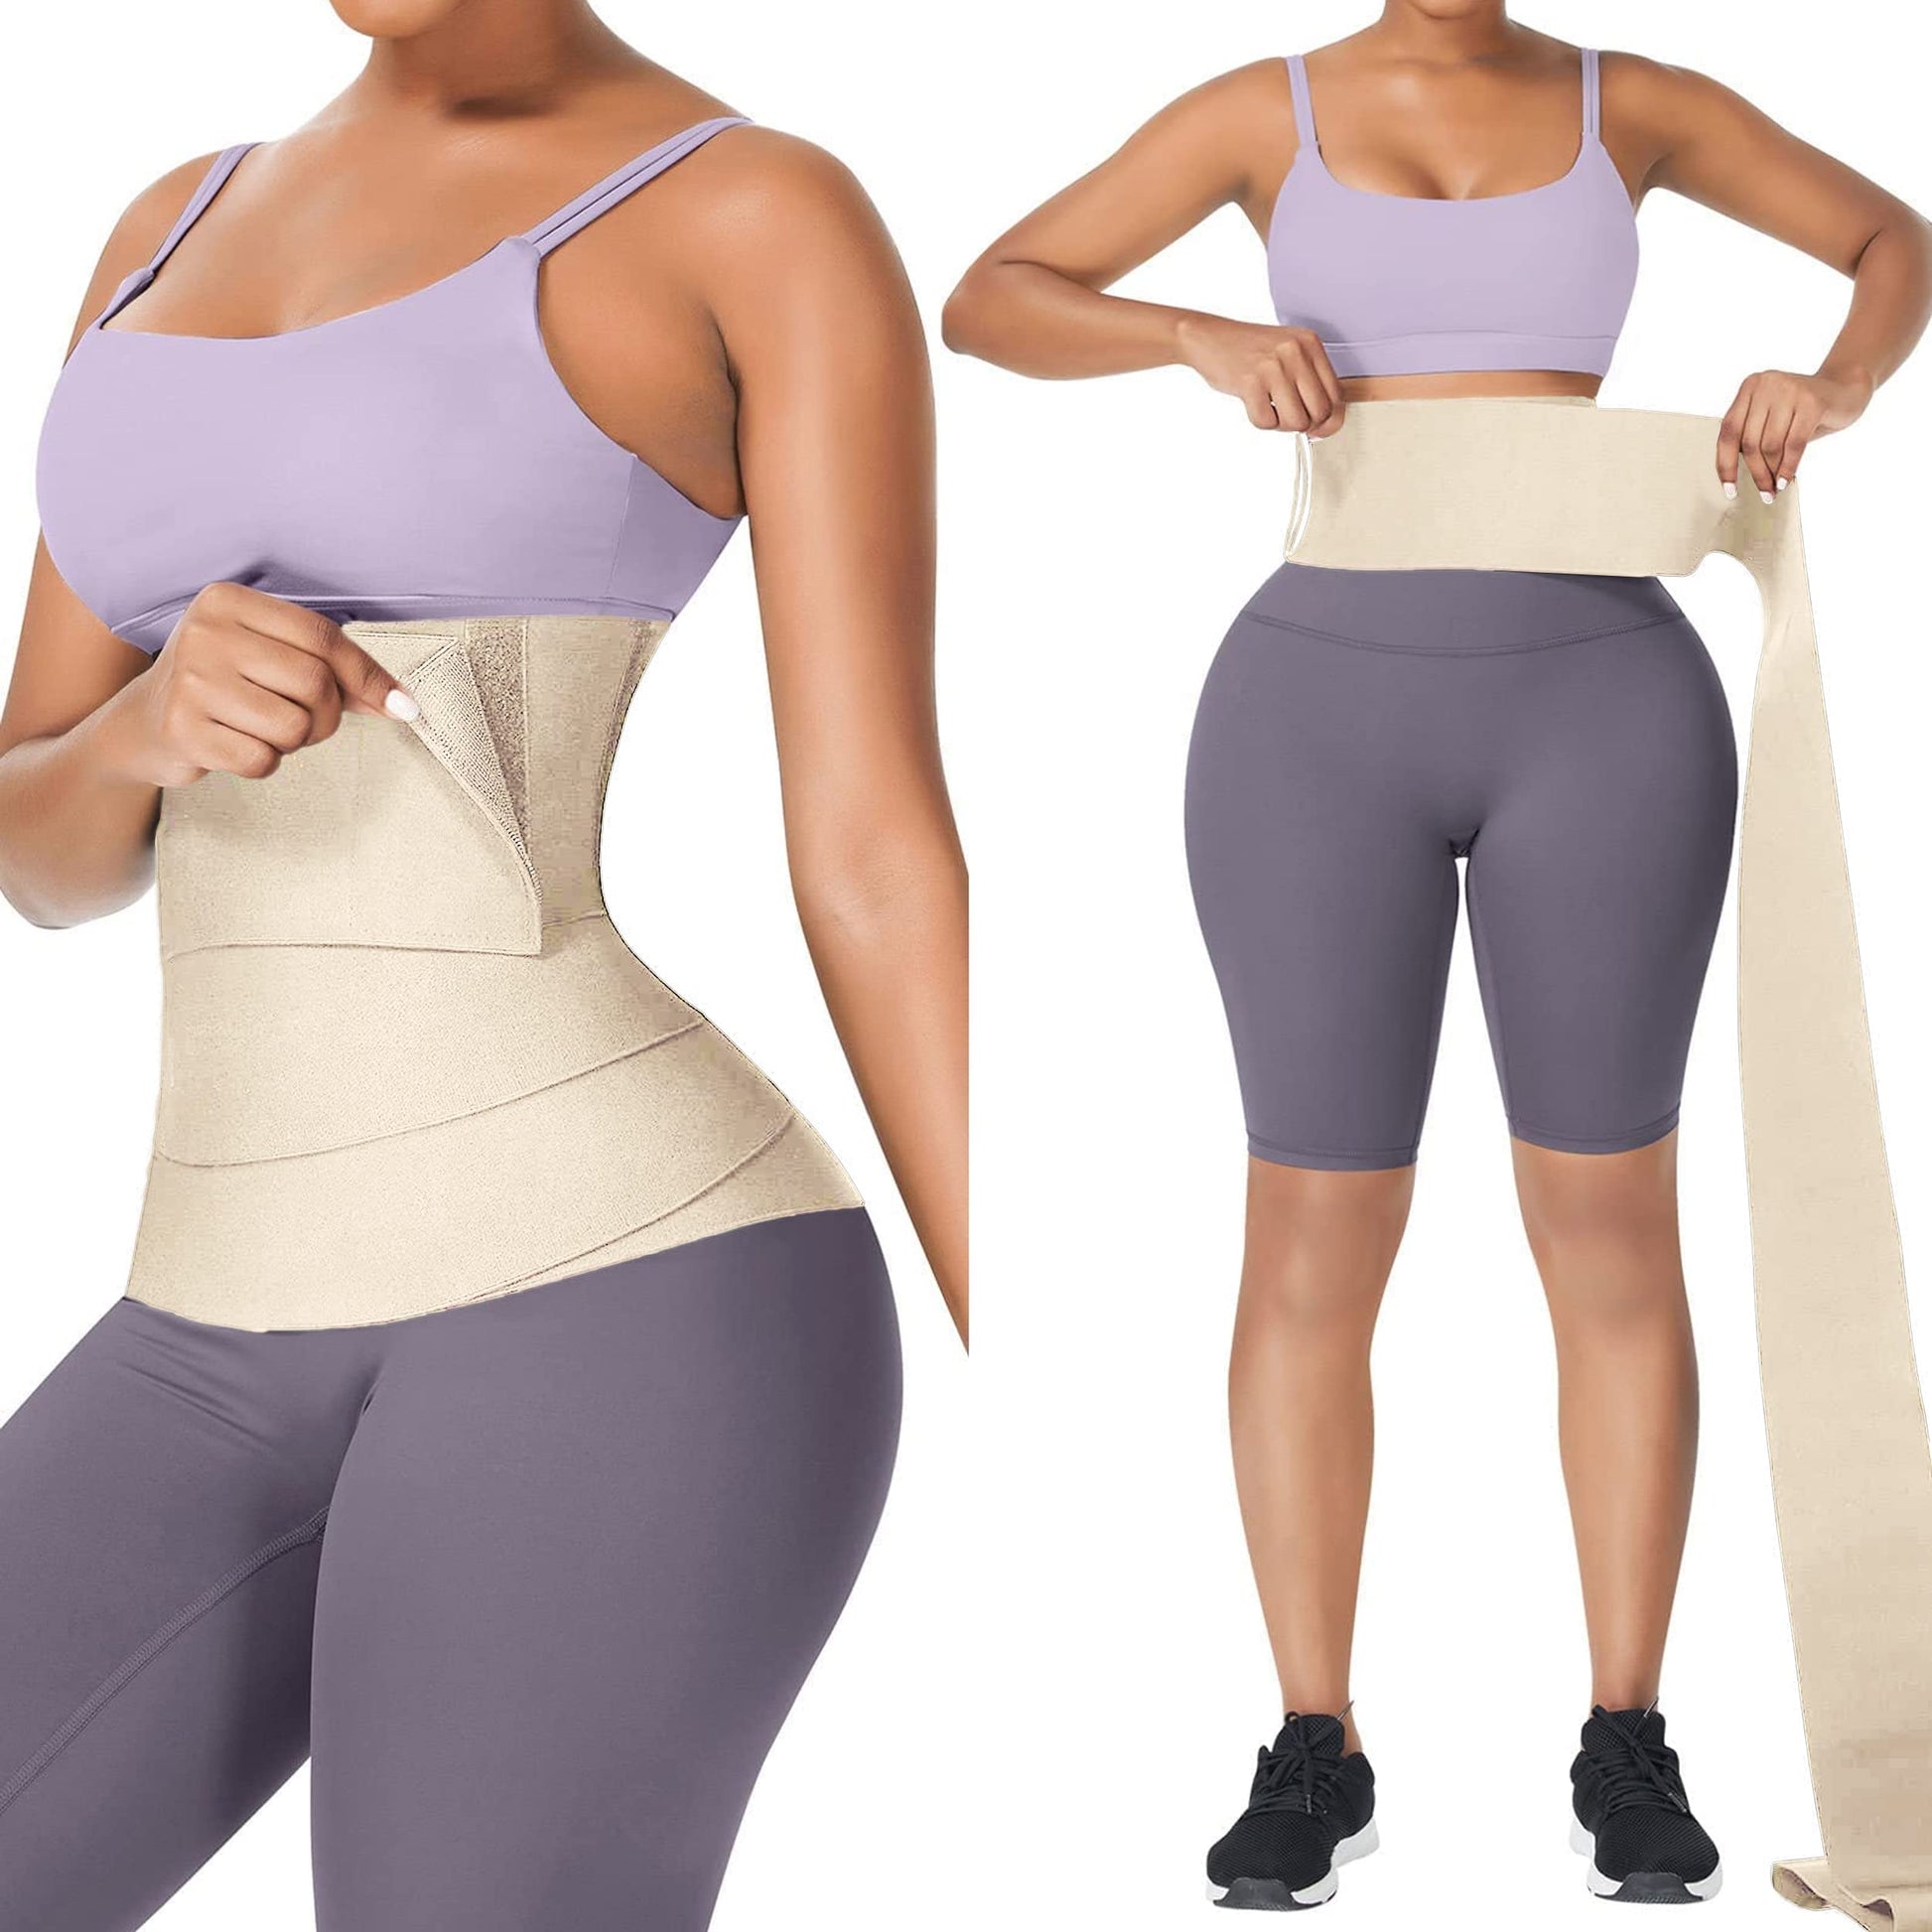 Soo slick Waist Trainer for Women Lower Belly Fat - Weight Loss